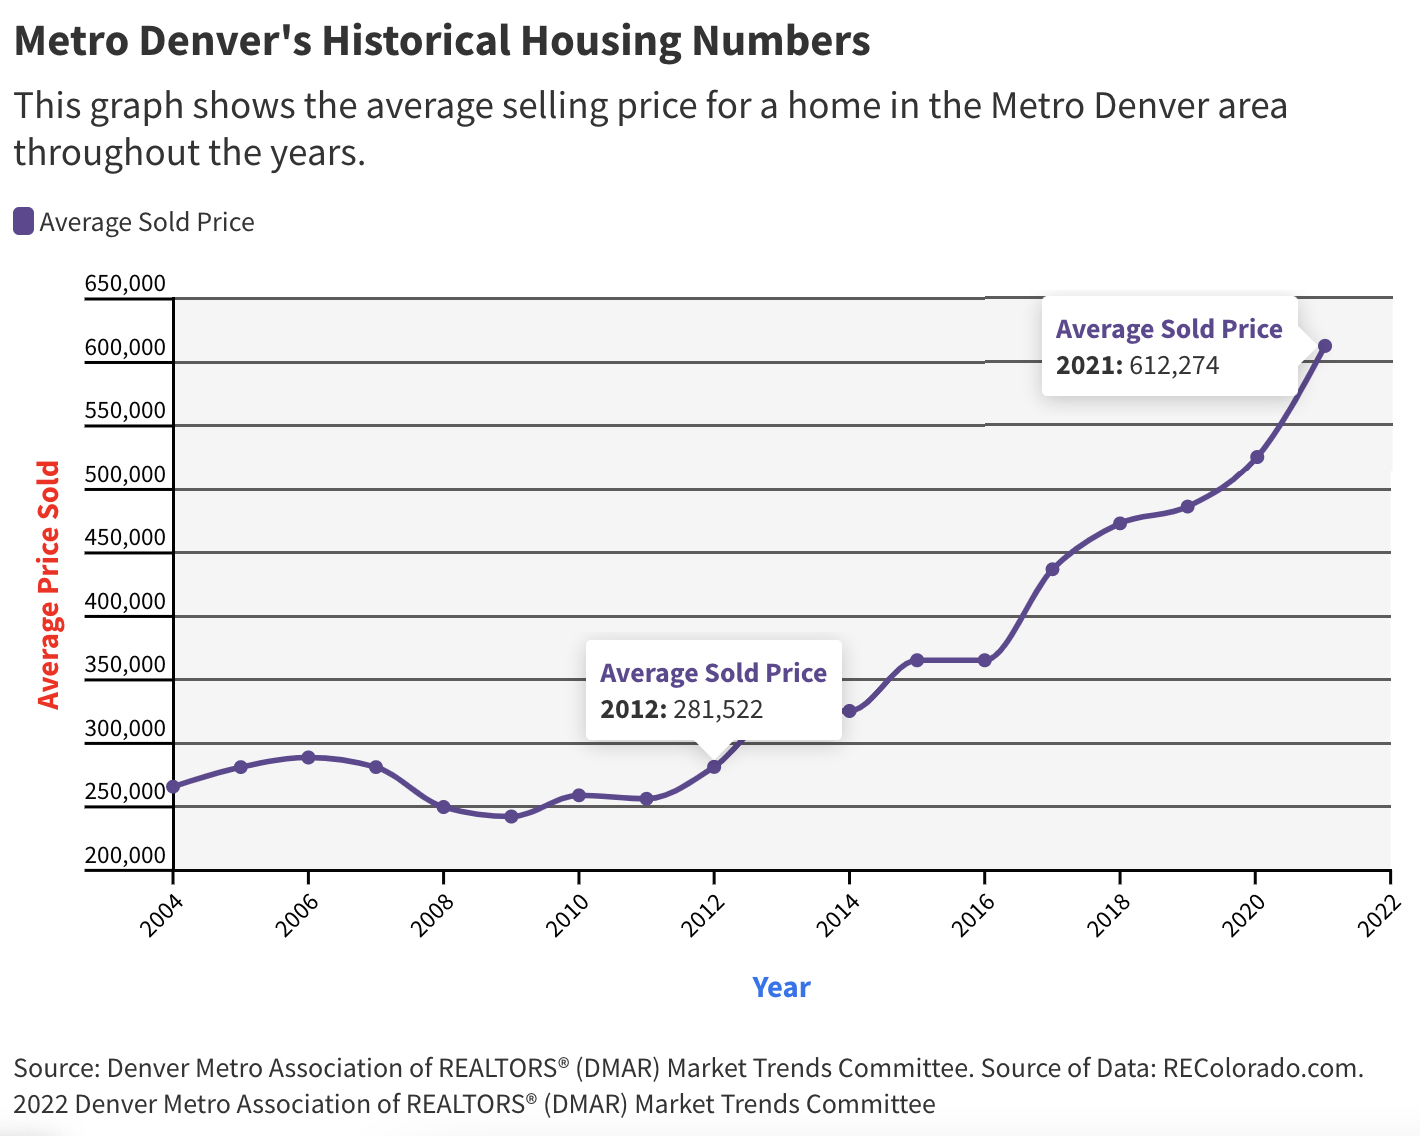 Historical housing numbers